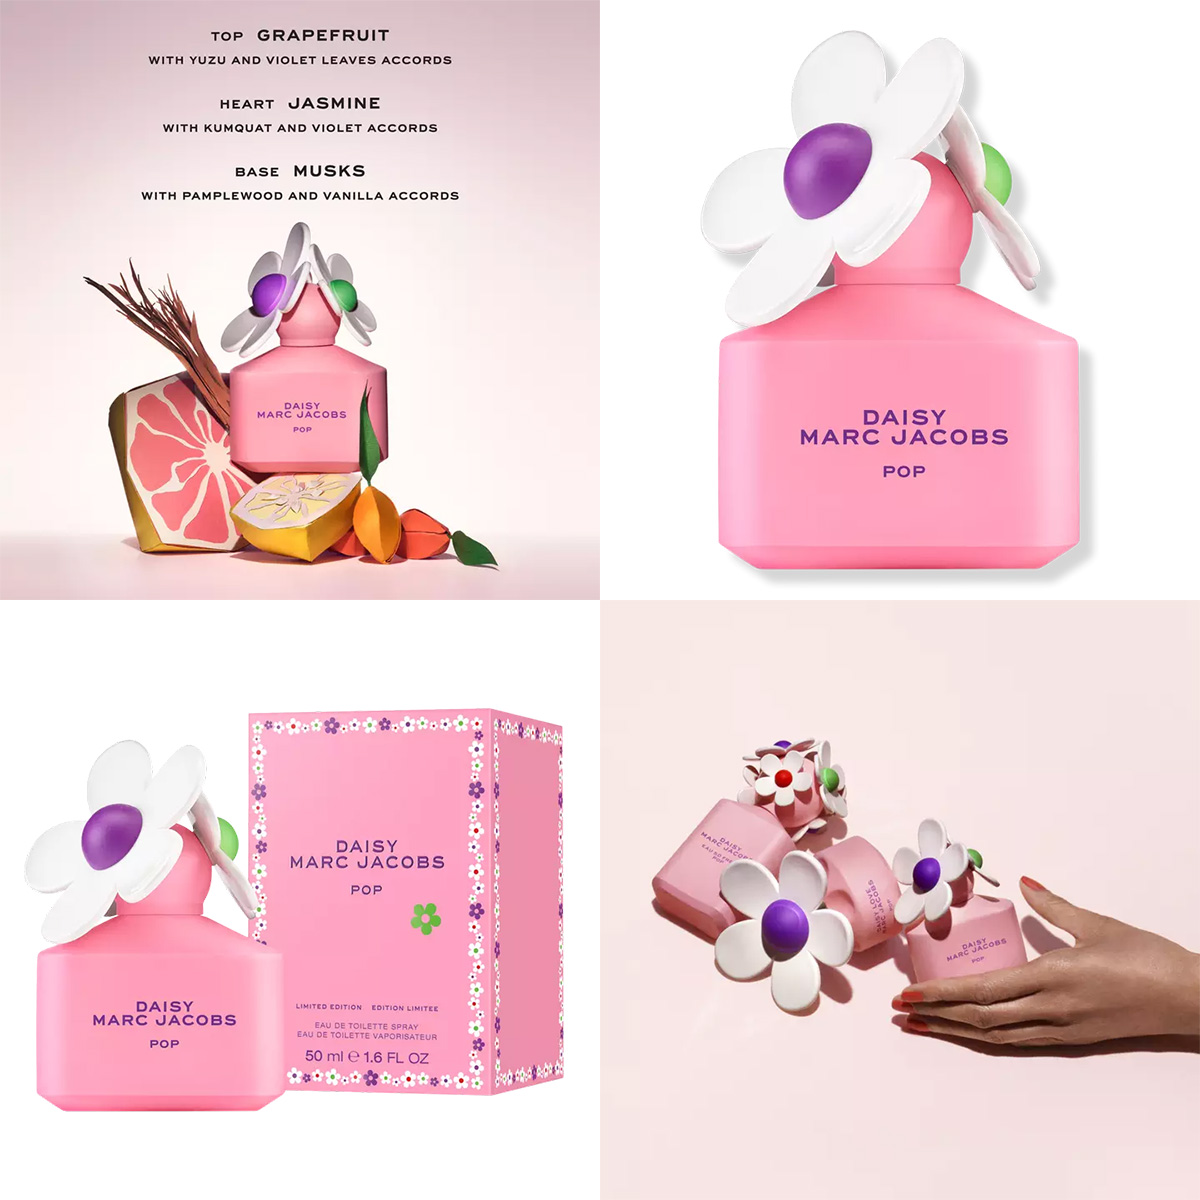 Marc Jacobs Daisy Pop perfume bottle, packaging, and fragrance ads